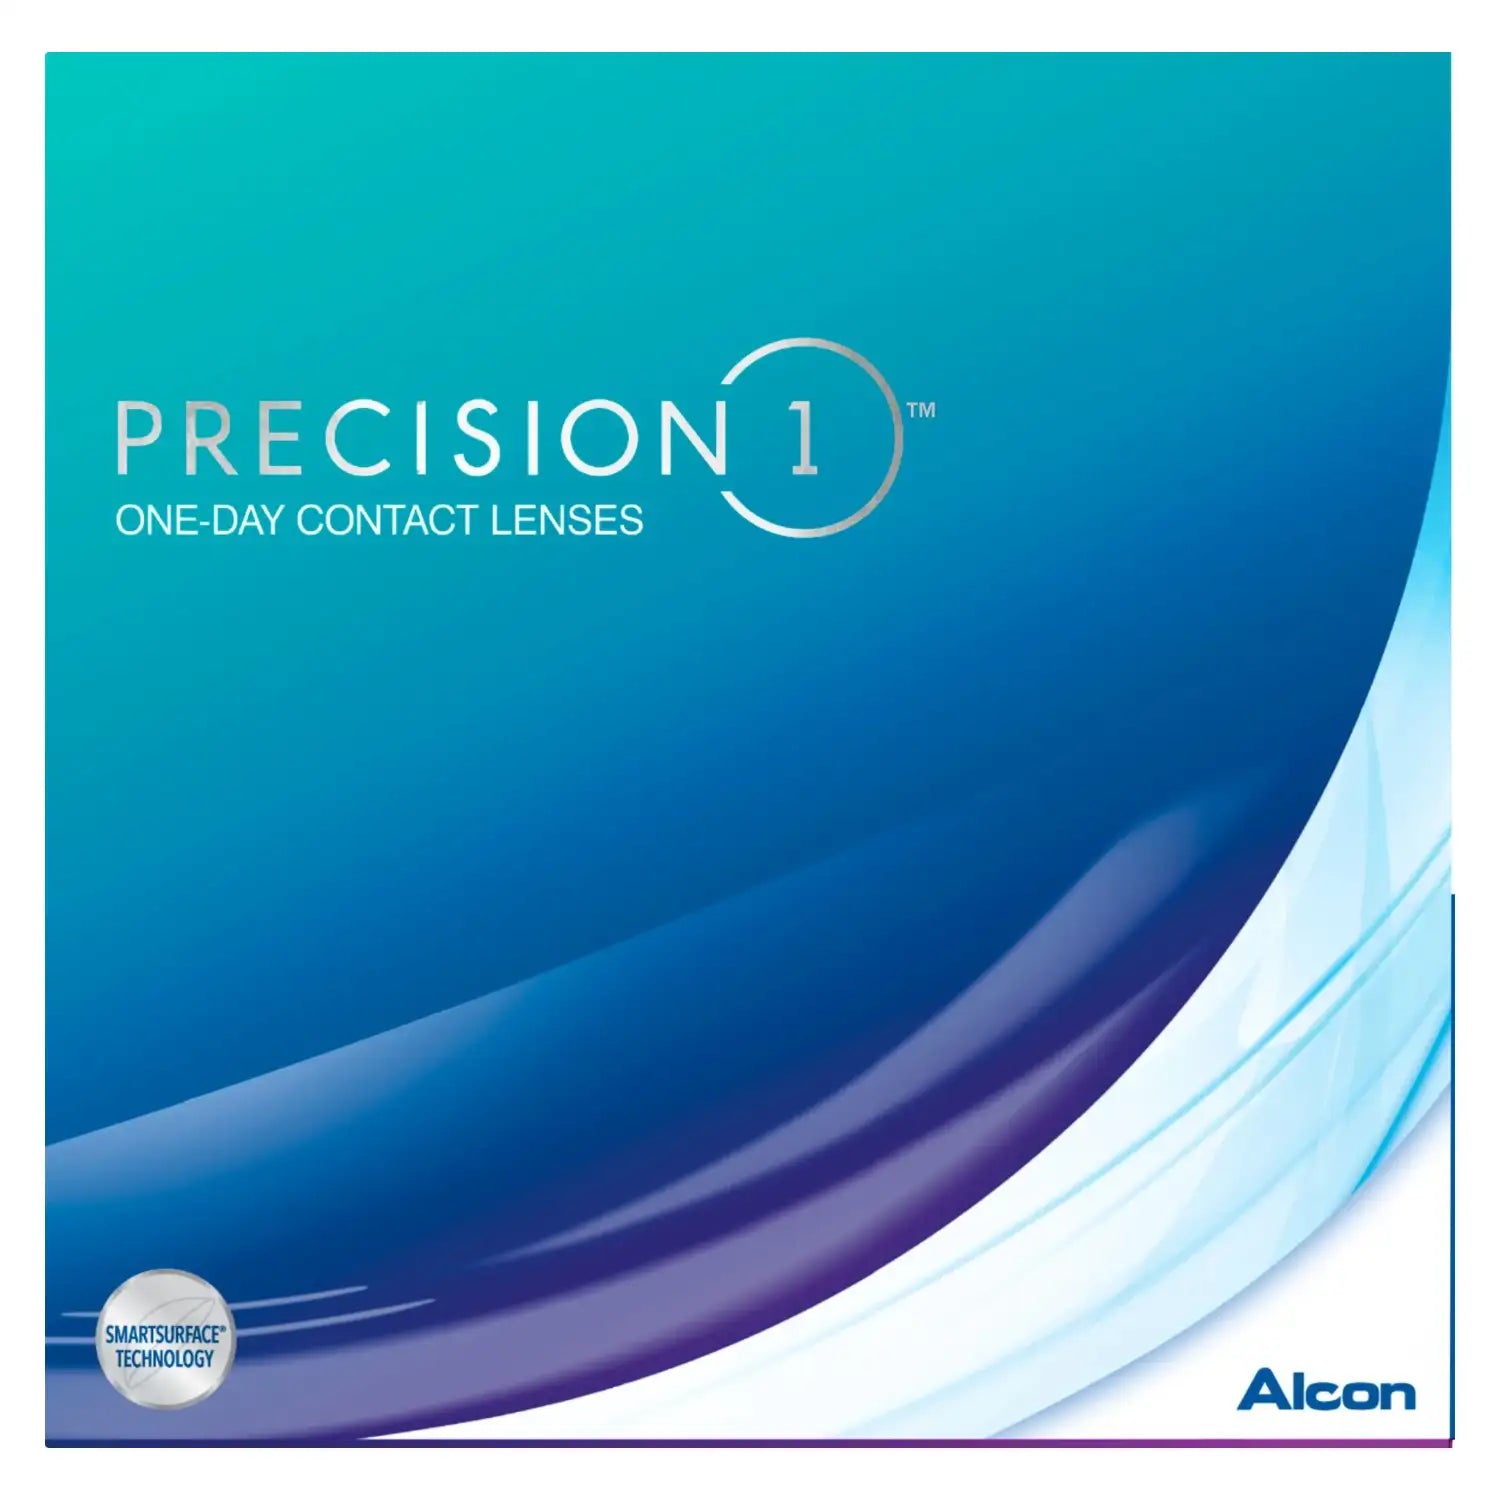 Precision 1 certified contact lenses online at low price